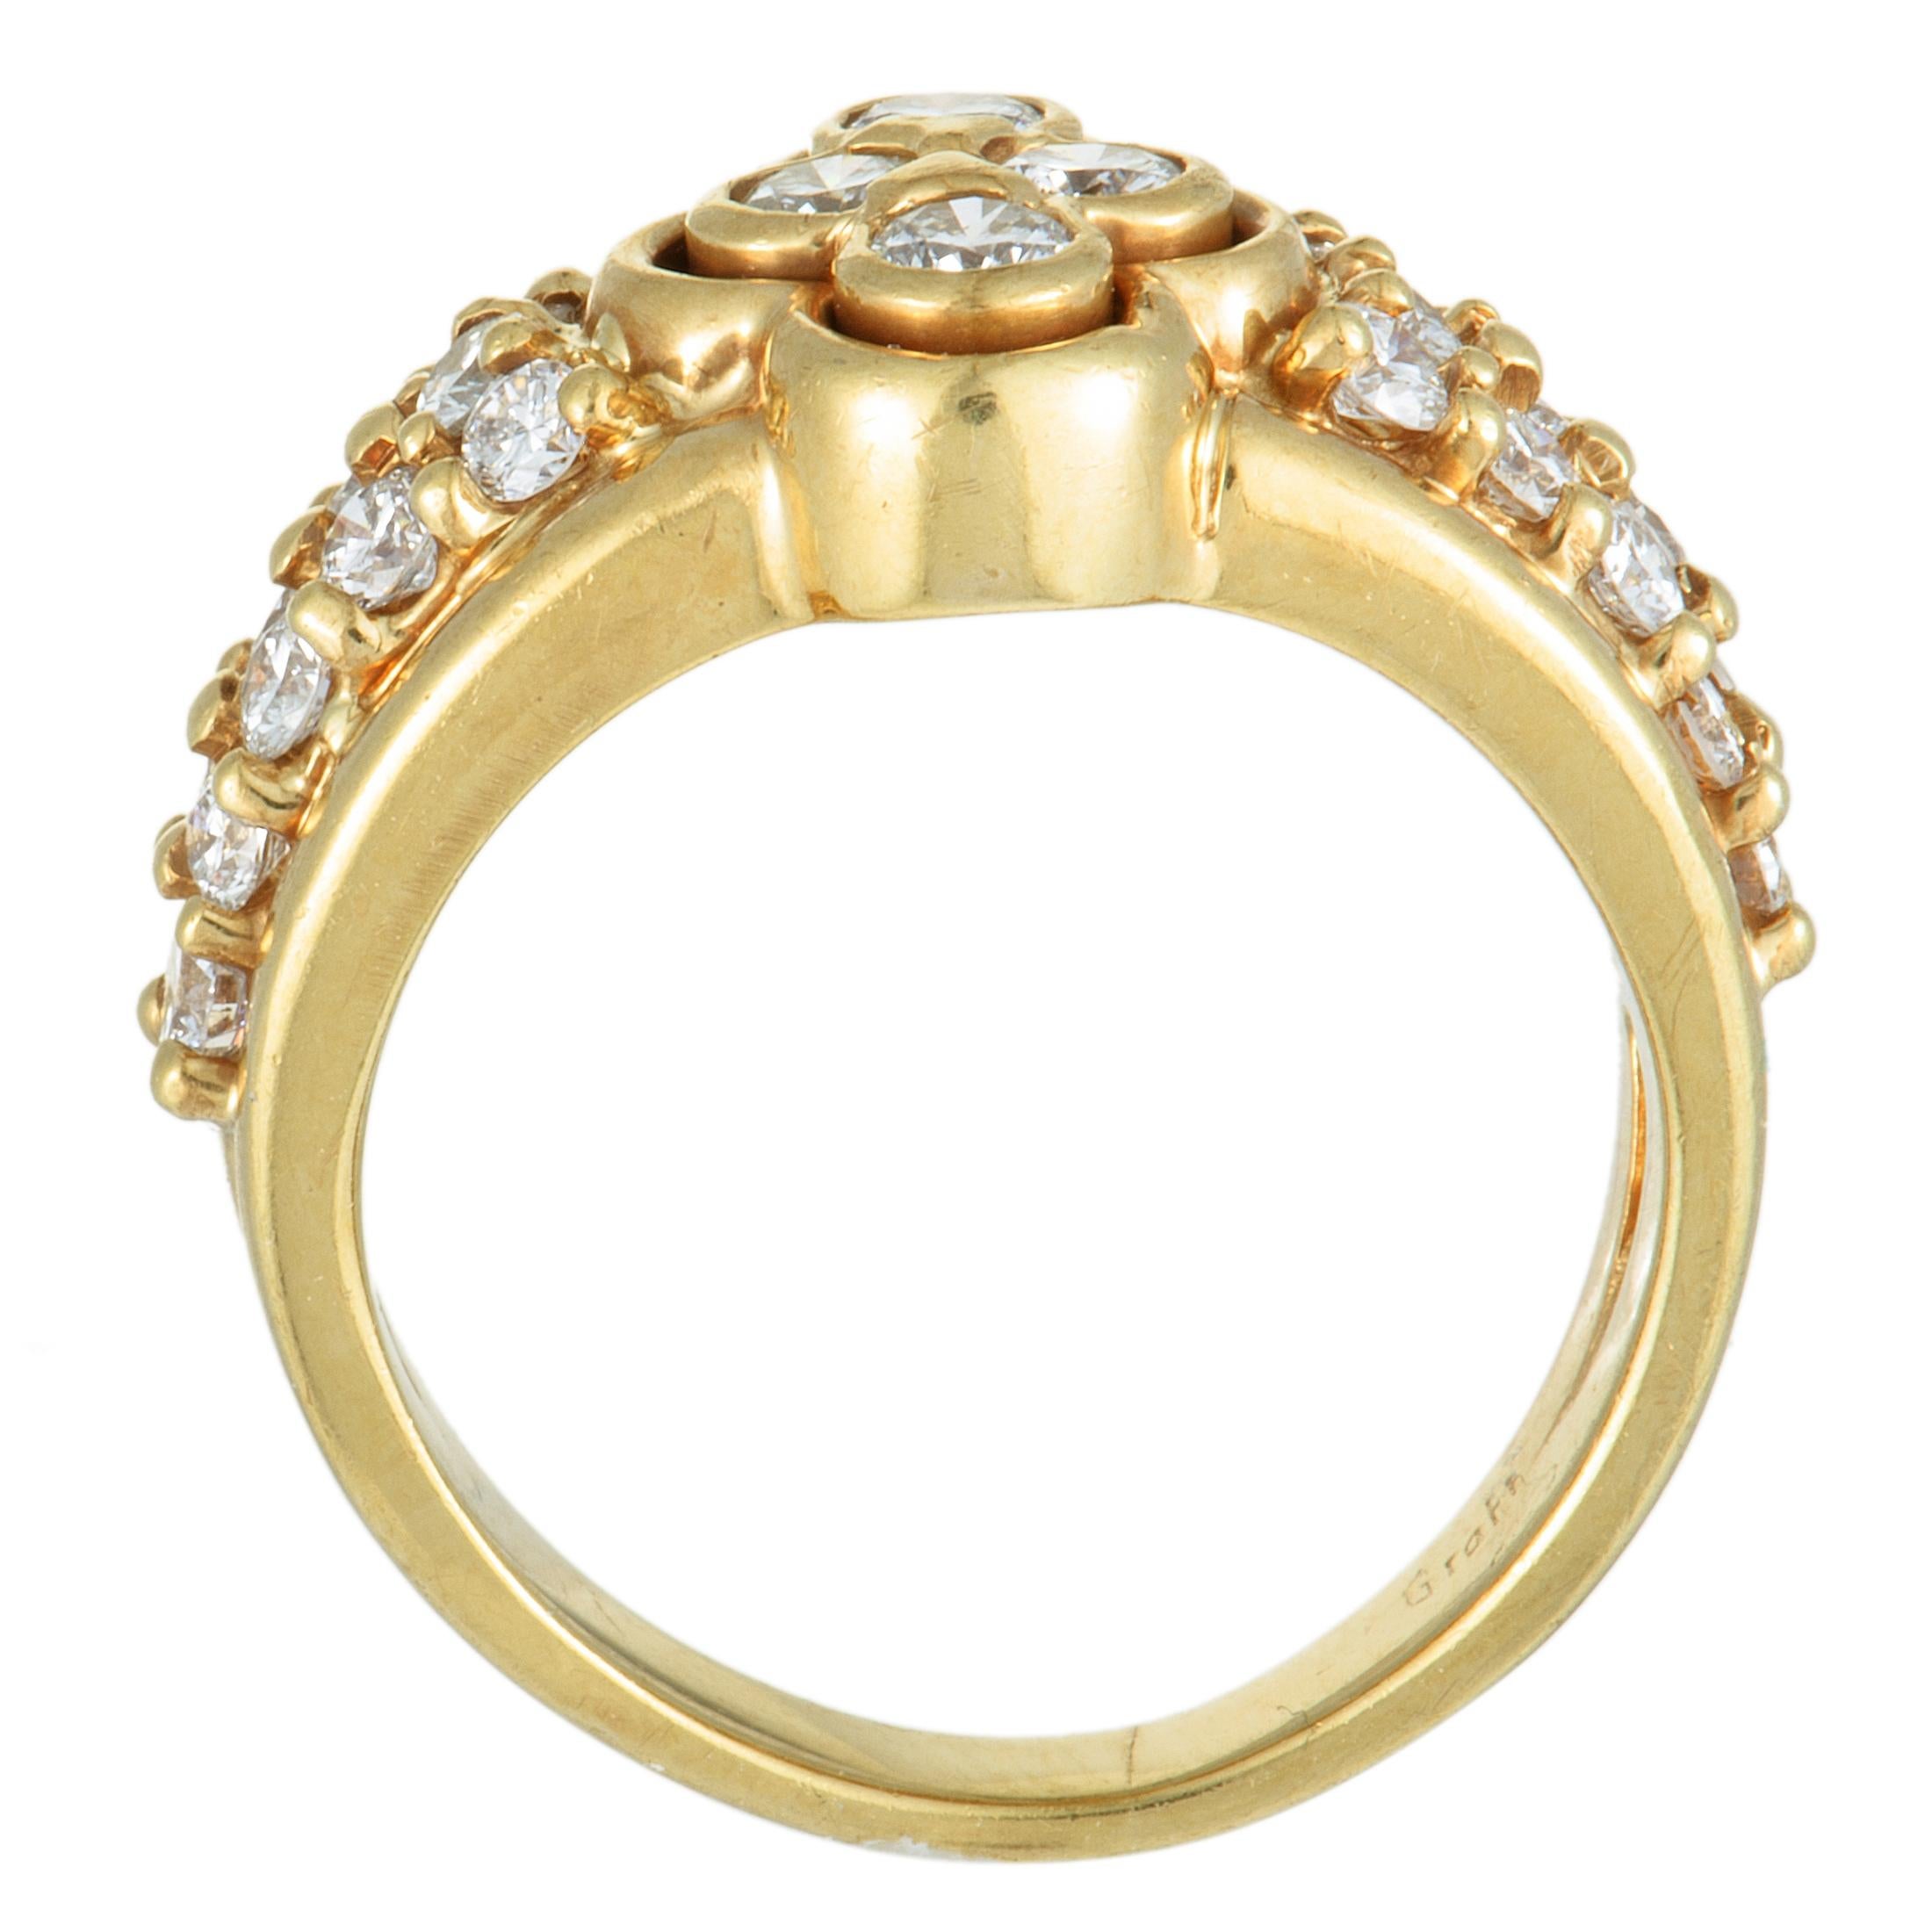 Boasting the ever-enticing luxe combination of classy 18K yellow gold and resplendent diamond stones, this fabulous ring that is designed by Graff offers an exceptionally prestigious look. The ring is expertly set with a total of approximately 1.10